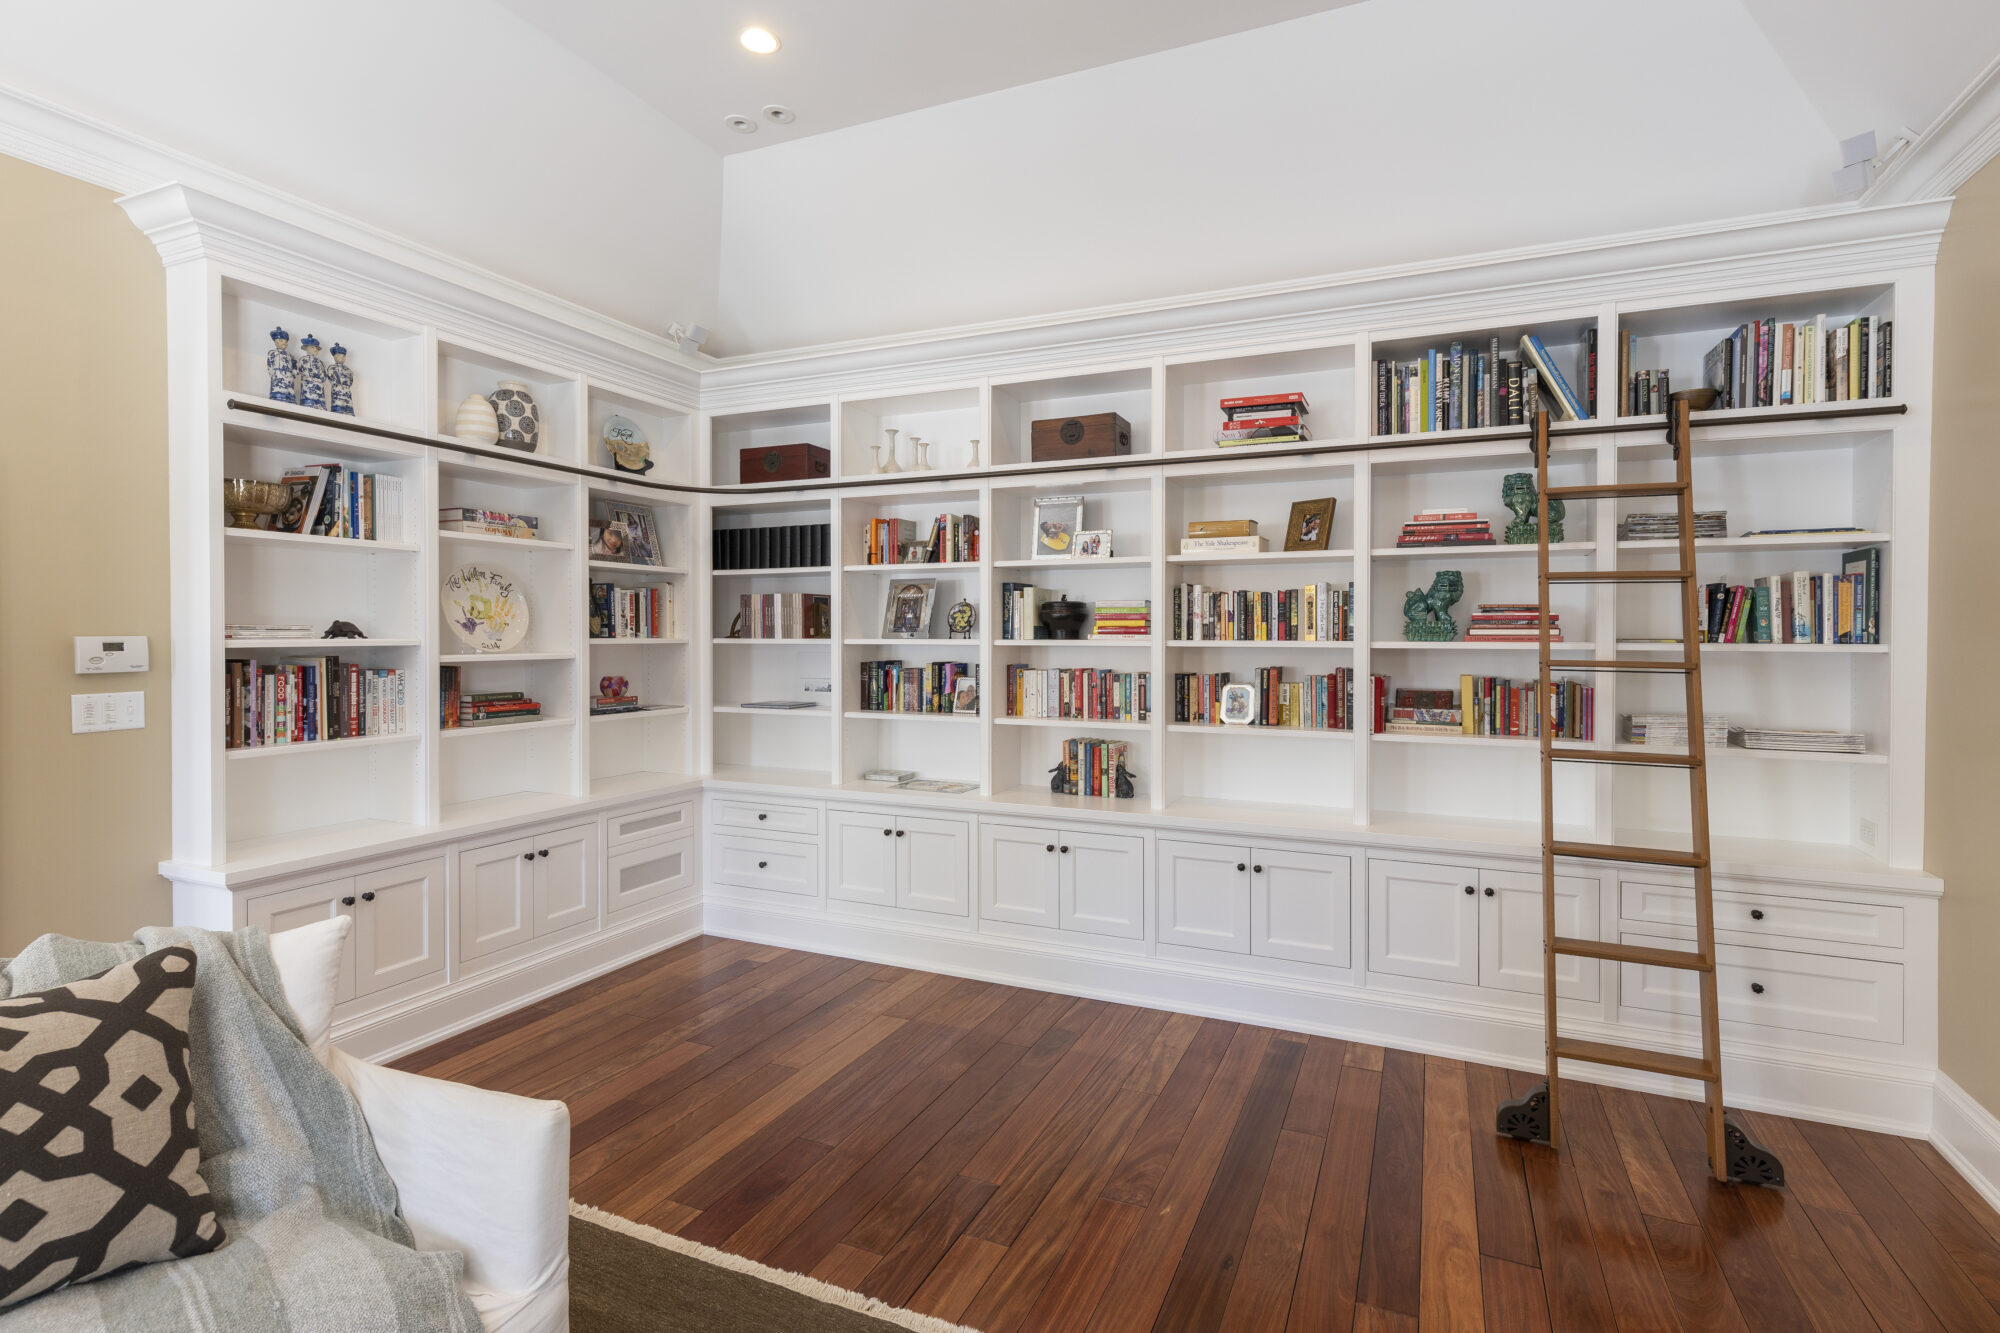 Custom-built white cabinetry forms an elegant bookcase wall in a renovated residential space, reflecting R.E. McNamara Inc.'s expertise in design and craftsmanship.